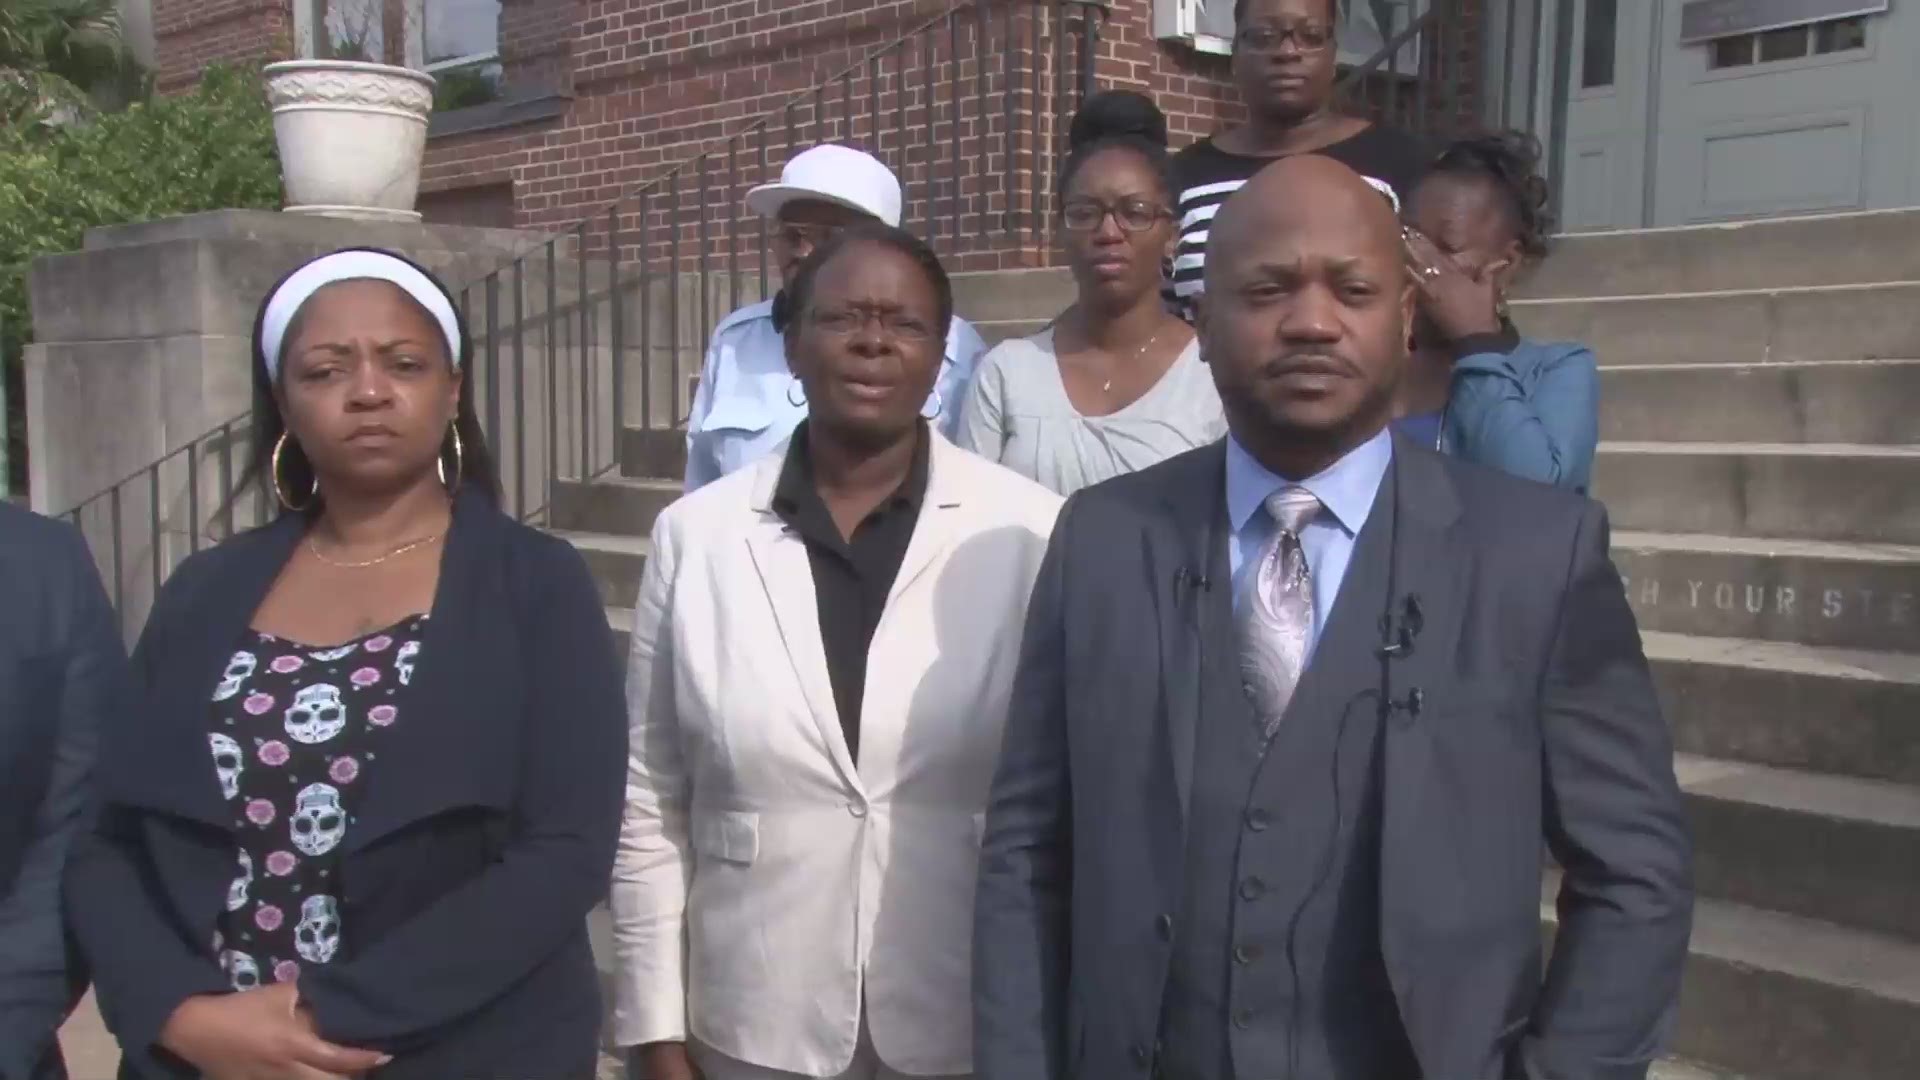 A week after Willie Bonner was killed in an accident at the Nichiha plant in Macon, Ga, the family has hired an attorney who announced a suit against the company.